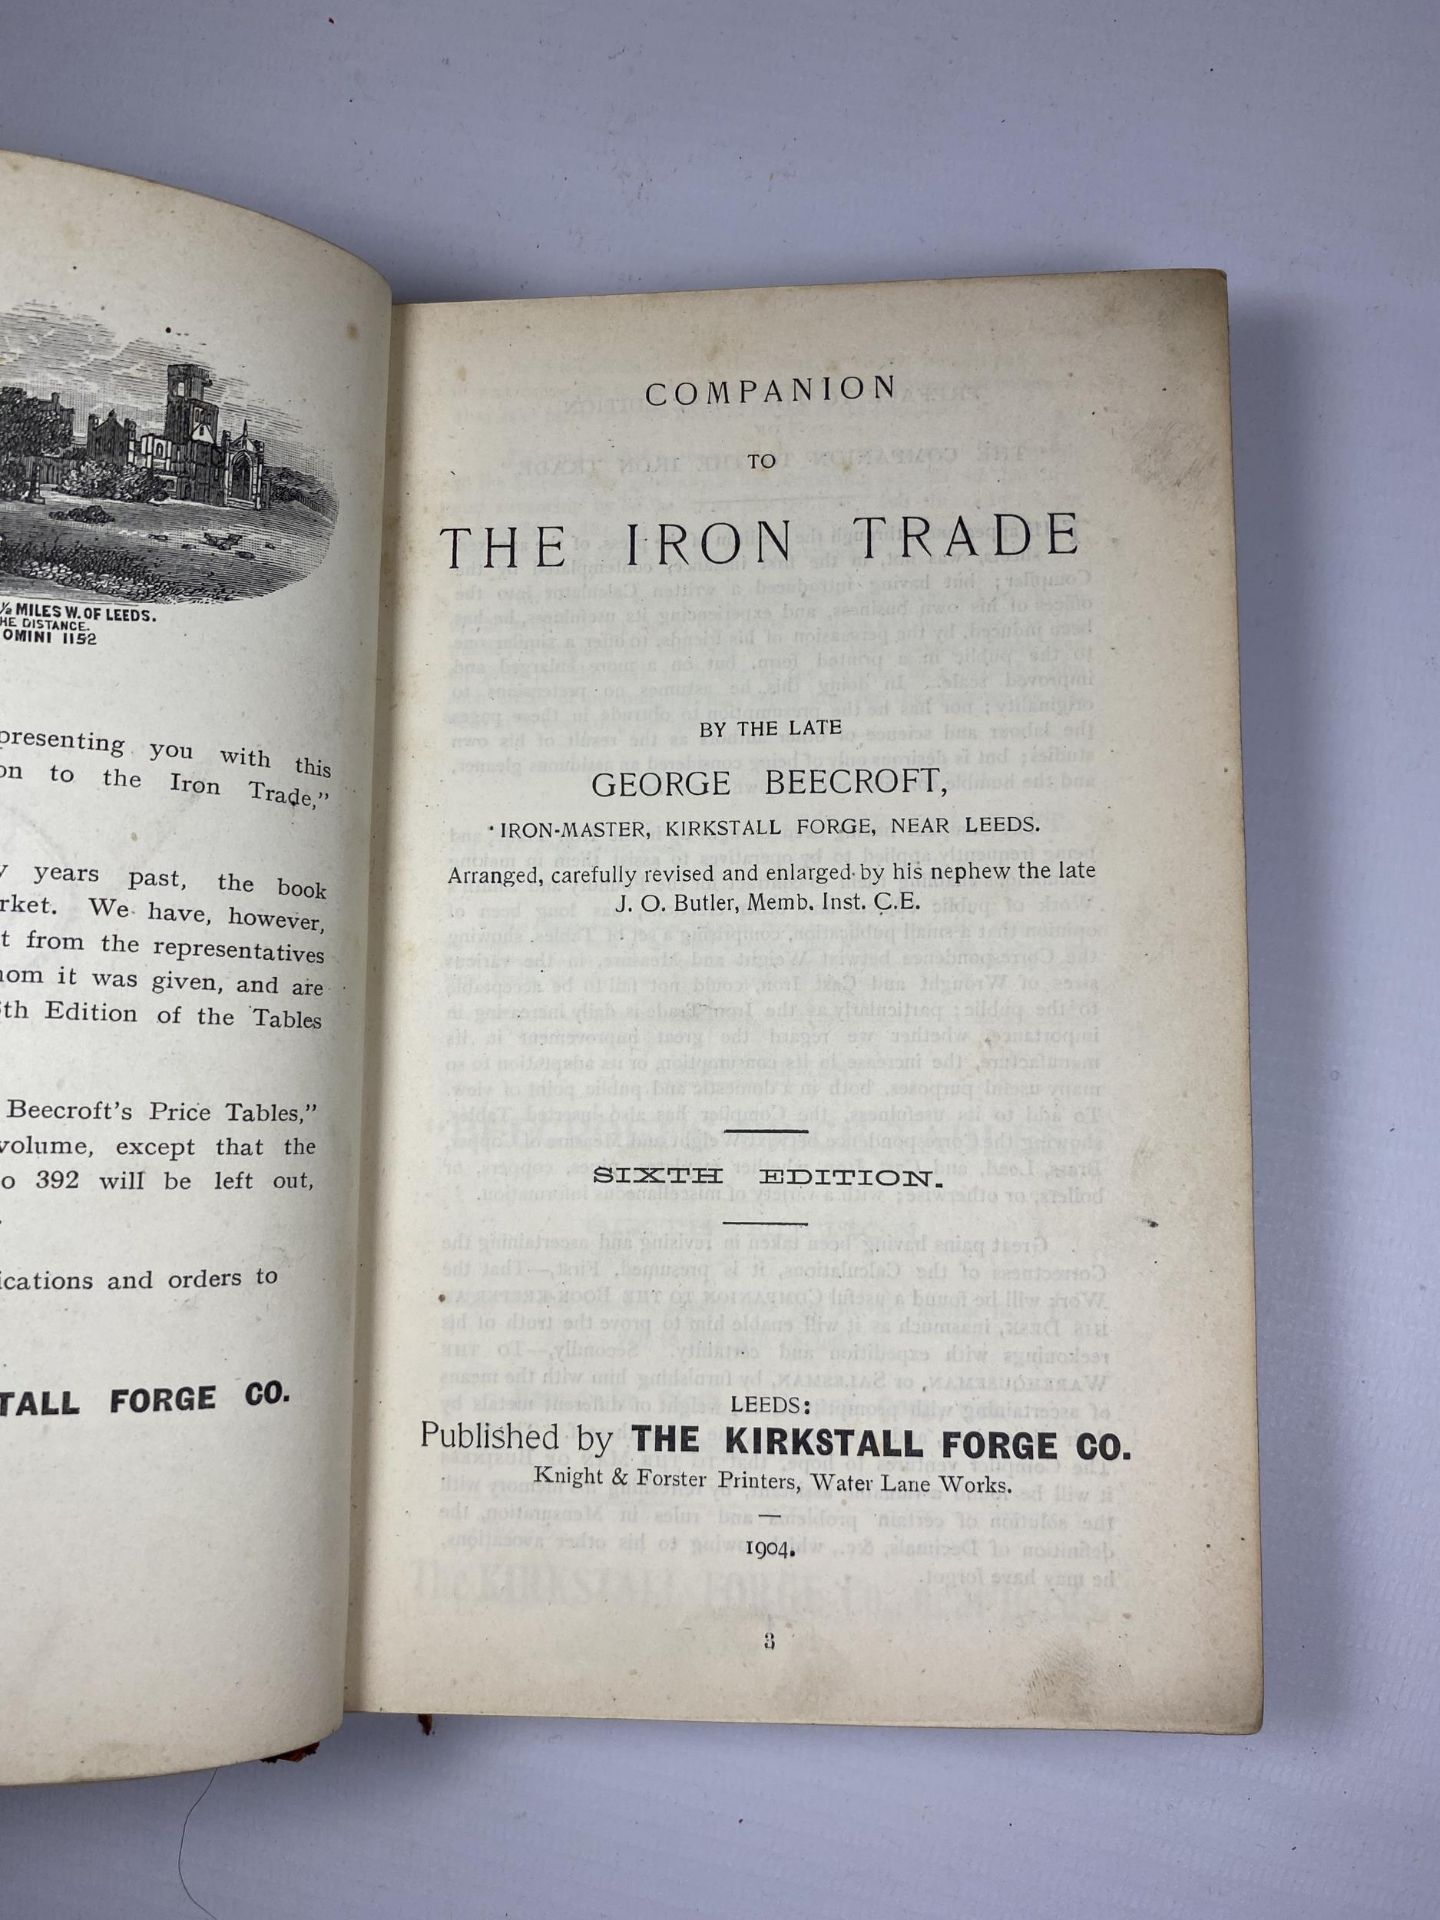 A 1904 'COMPANION TO THE IRON TRADE' BOOK PRESENTED BY THE KIRKSTALL FORGE CO, LEEDS - Image 4 of 5